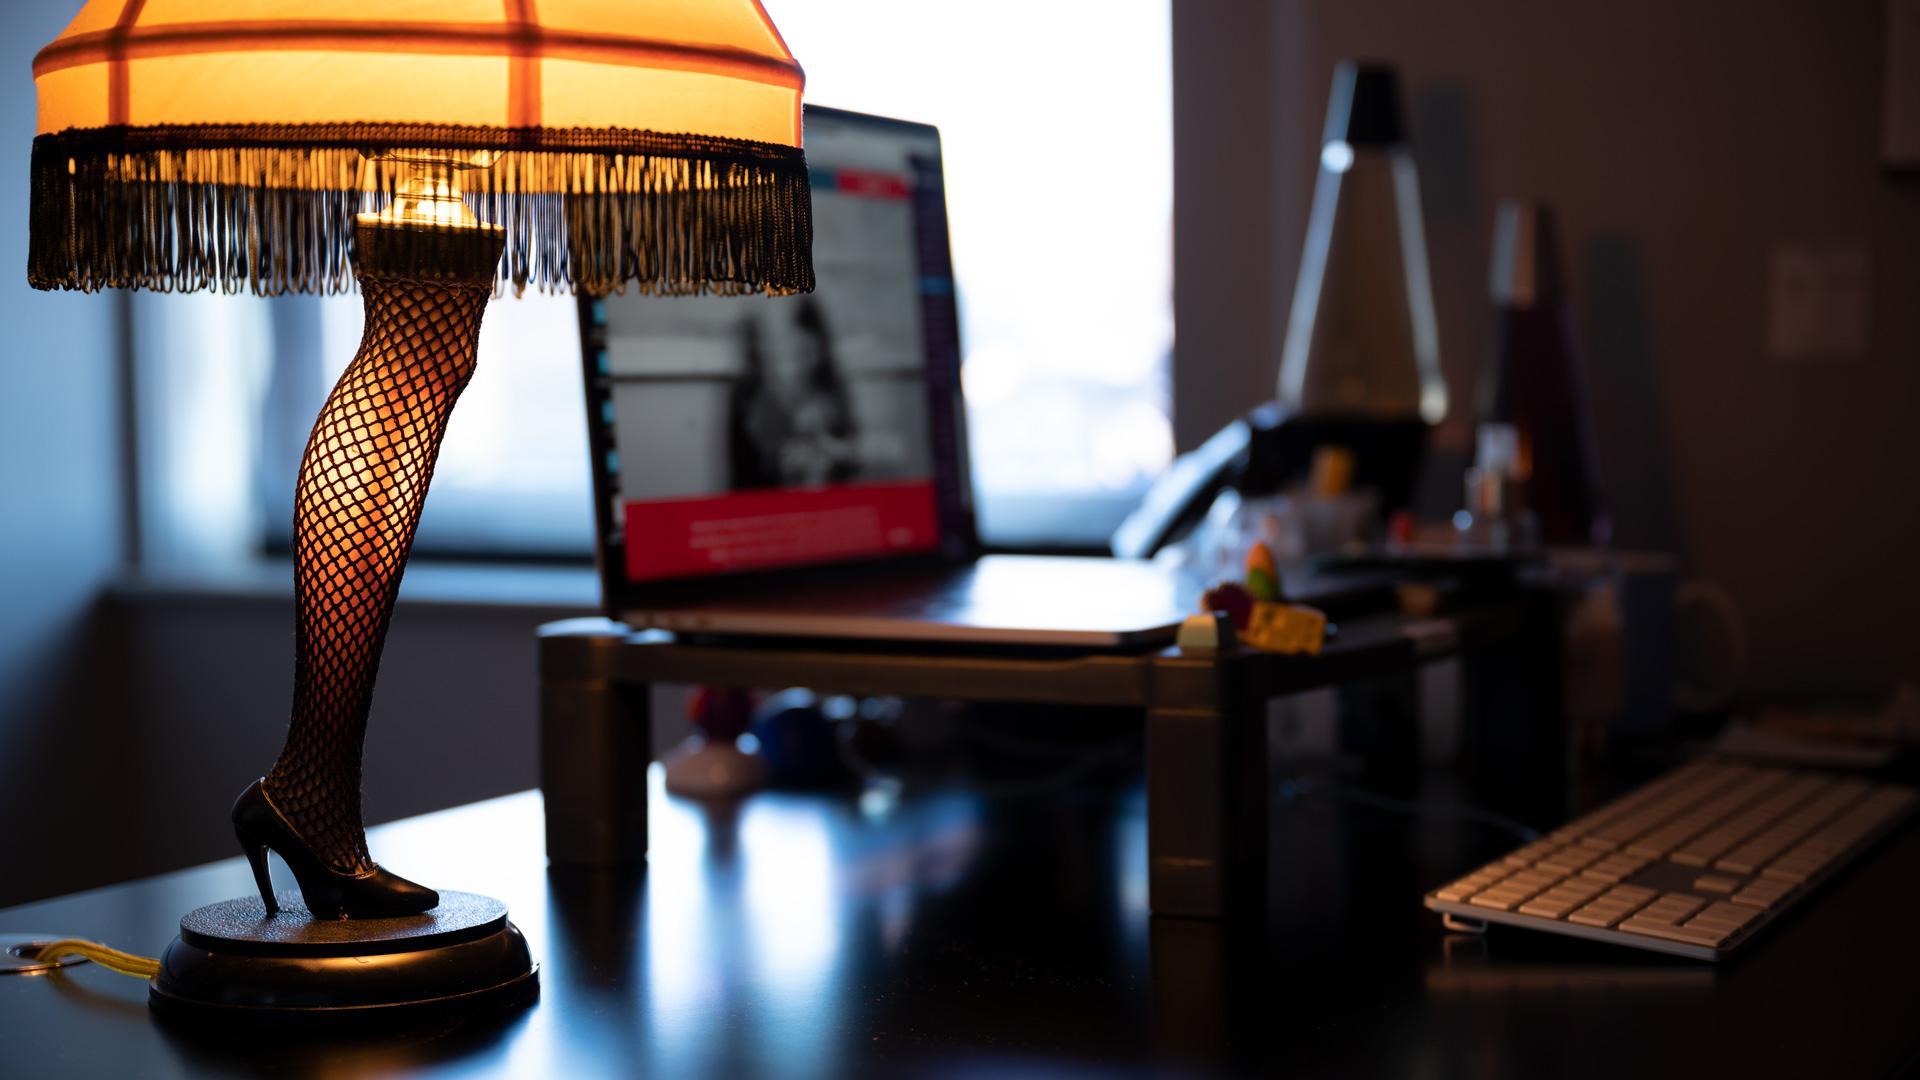 Closeup of a reproduction of the leg lamp from A Christmas Story on a desk at Vendi Advertising